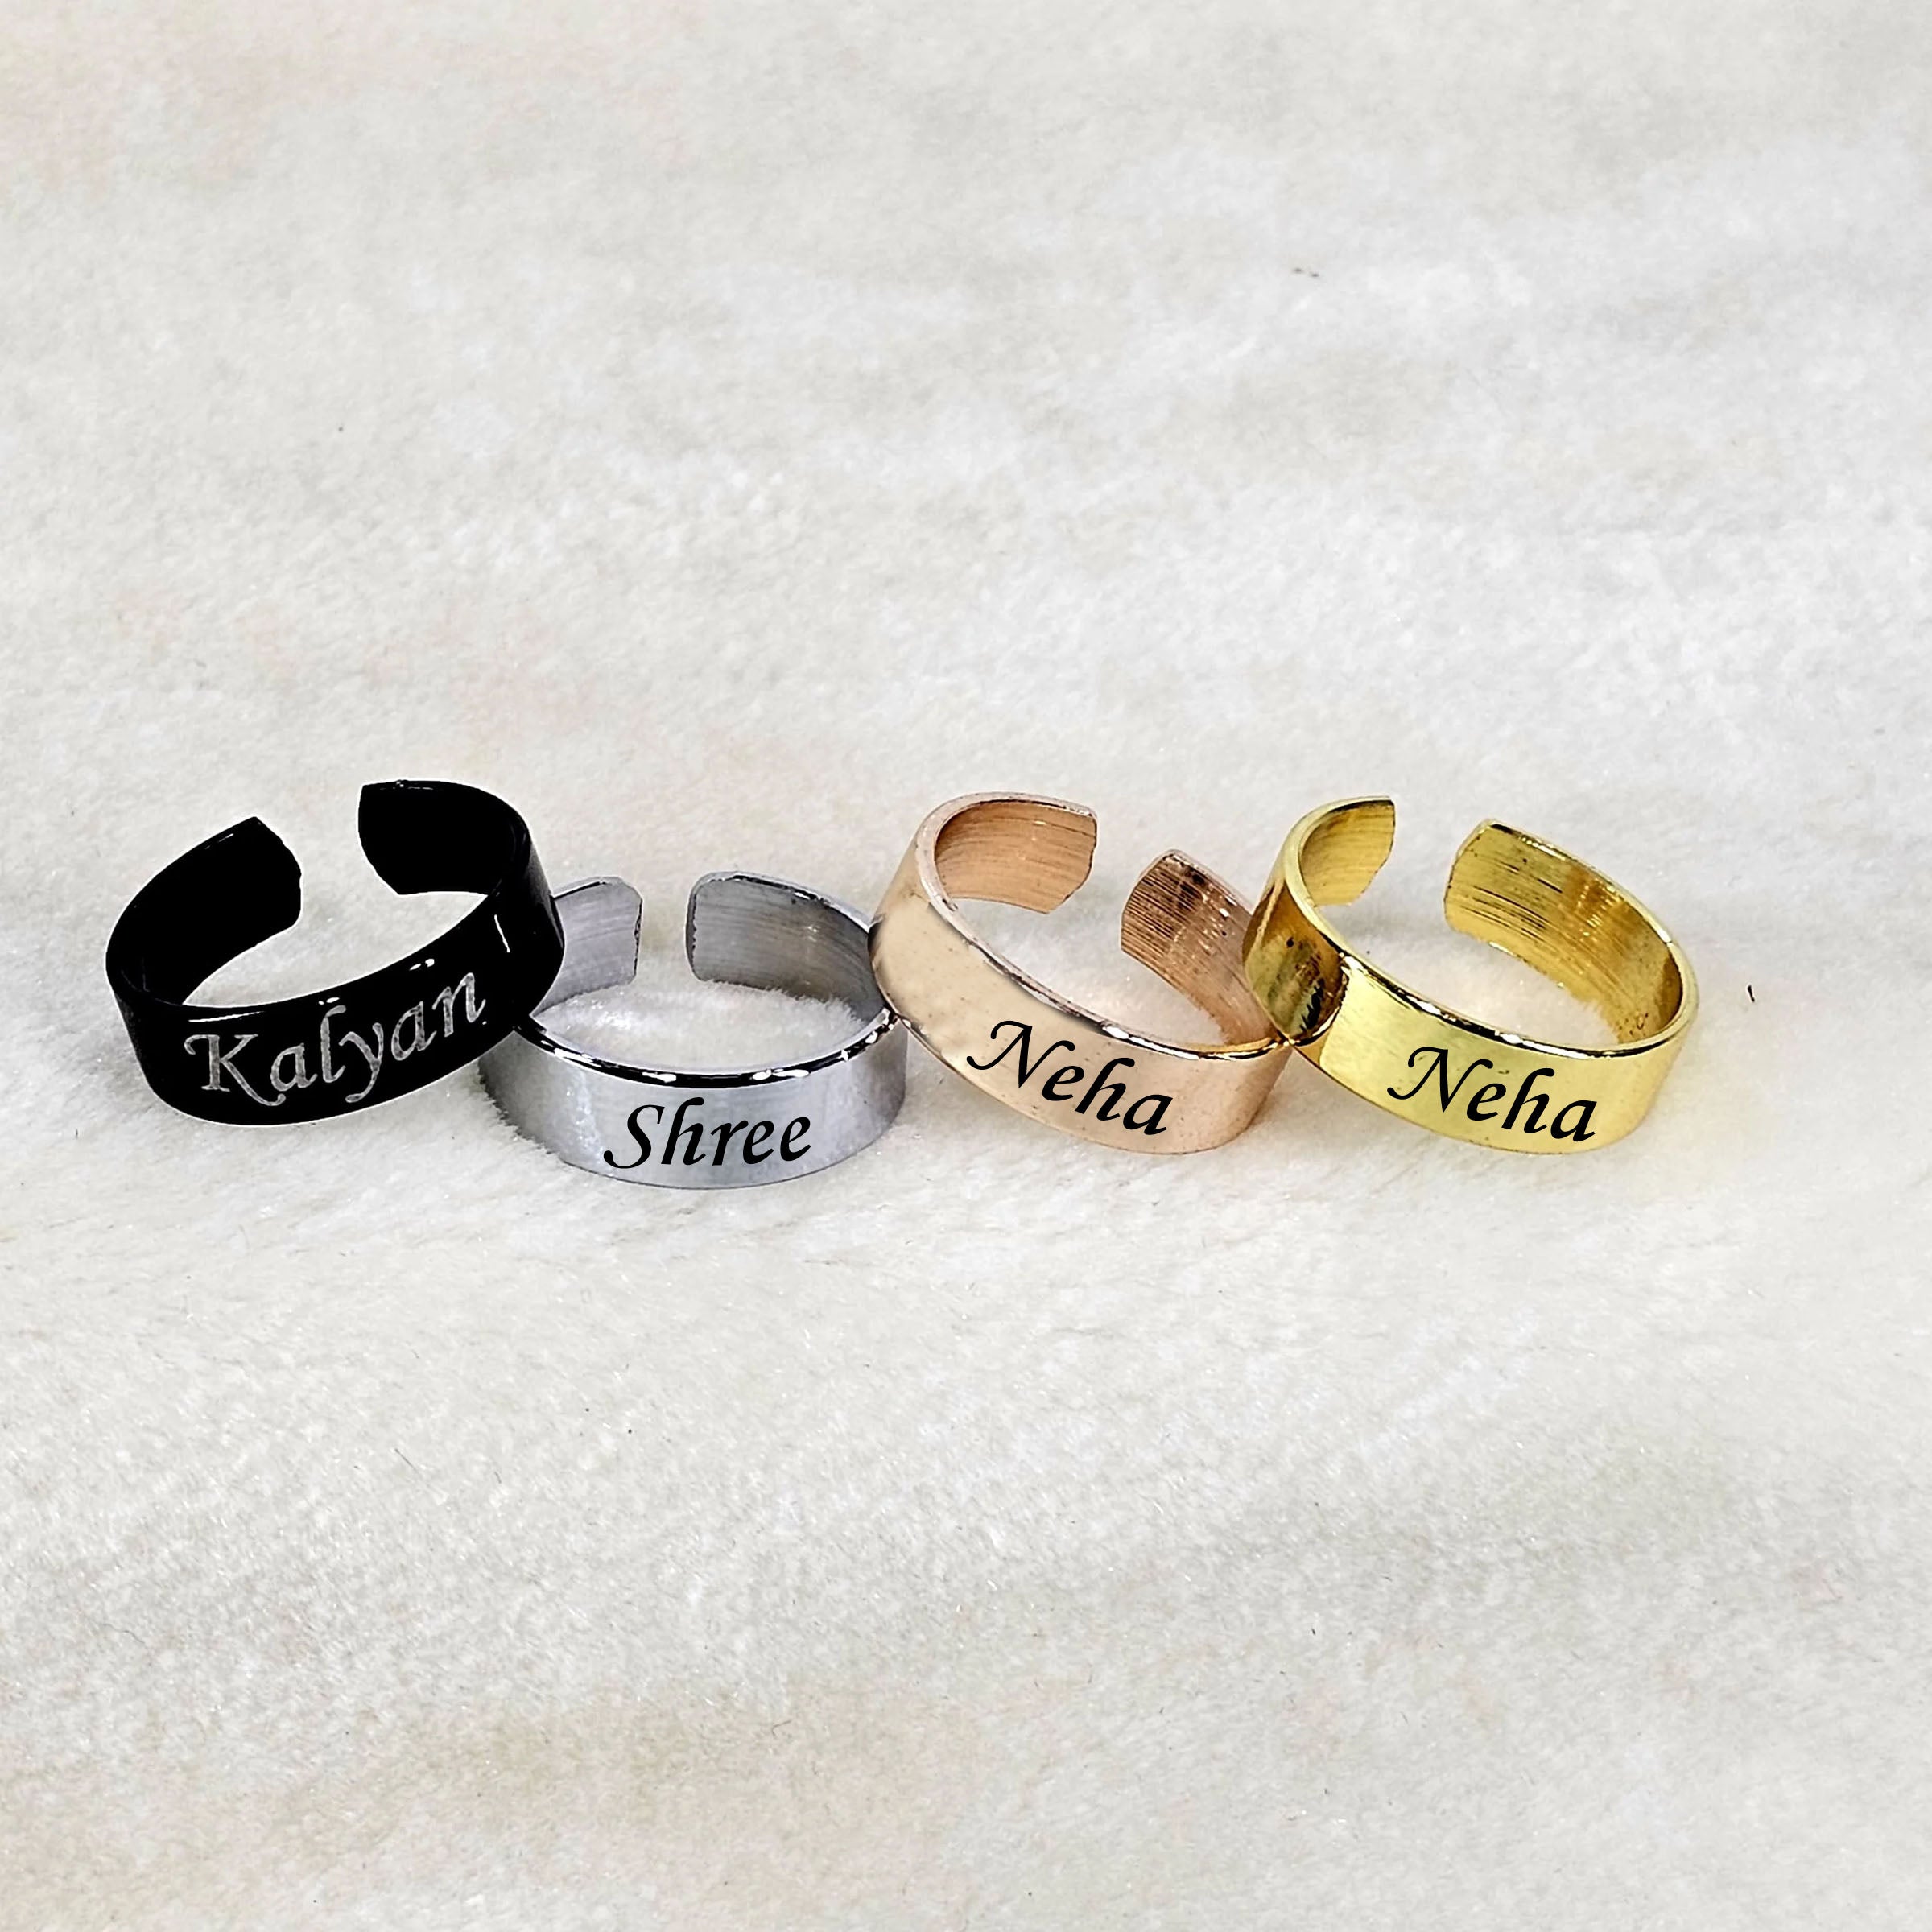 Name Rings - A Timeless Gift - My Name Charm, Name Necklaces, Name Rings &  Other Name Jewelry